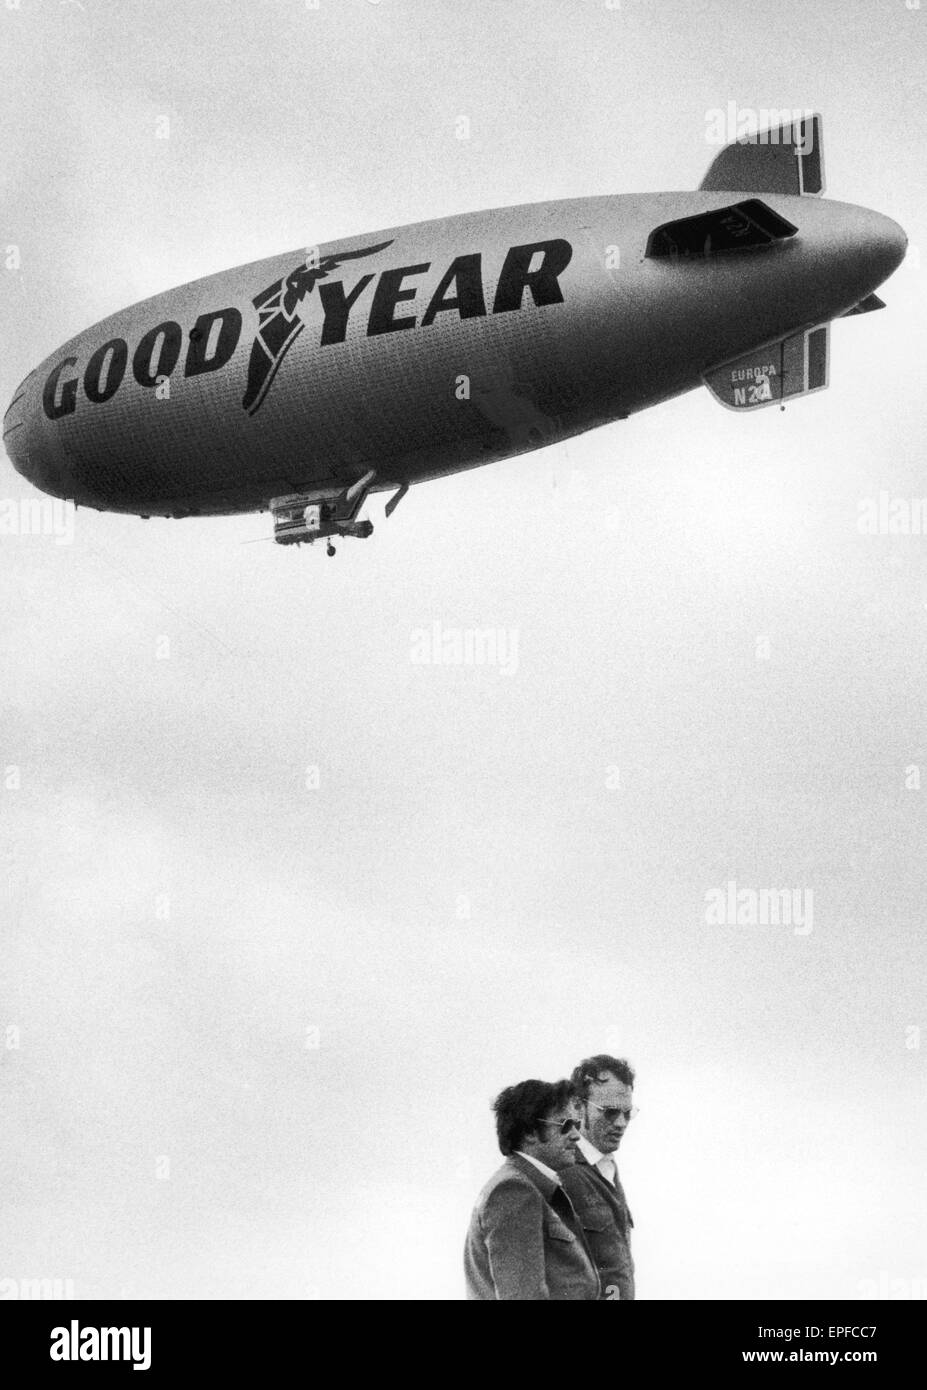 The rebuilt Goodyear Airship Europa which crashed in April 1972 seen here in the skies over RAF Cardington formerly the Royal Airship Works completing it's flight trials before re-entering service. 25th June 1972 Stock Photo